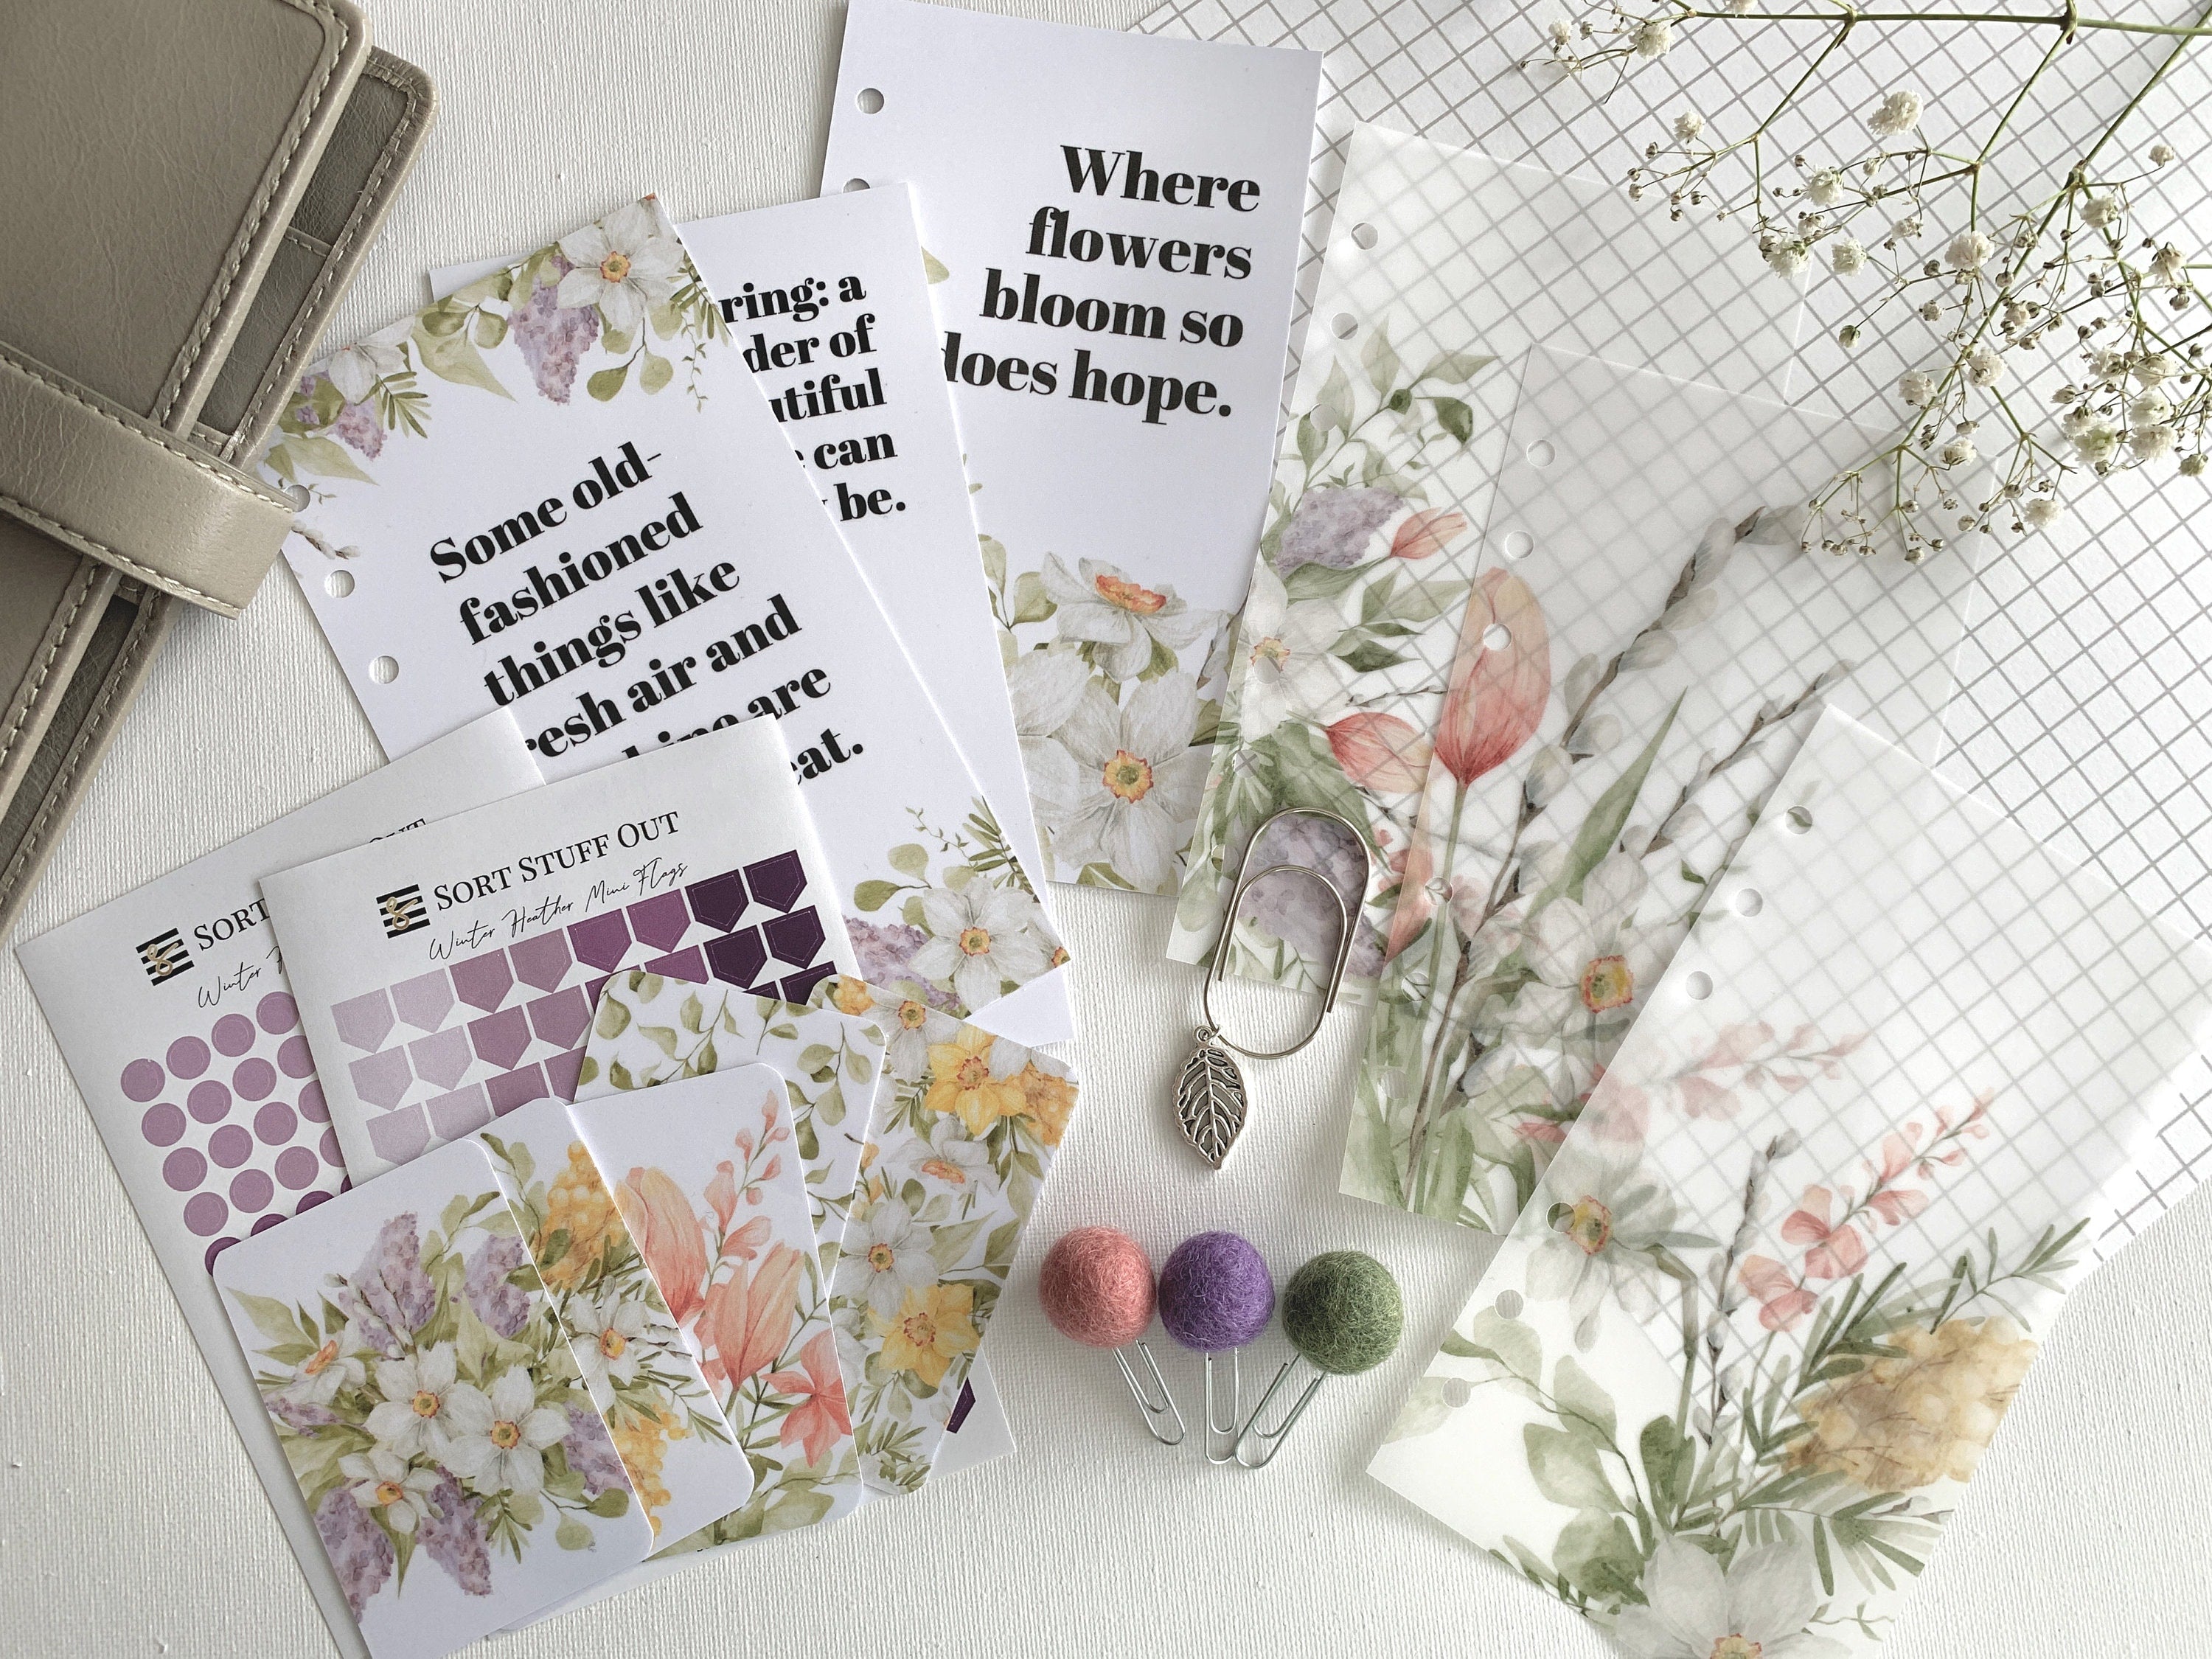 Watercolour Flowers - Spring Bundle 1 saving 25% - Fits A5, B6, Personal Wide, FCC, Personal, A6, Pocket +, Pocket, Mini Ring Planners